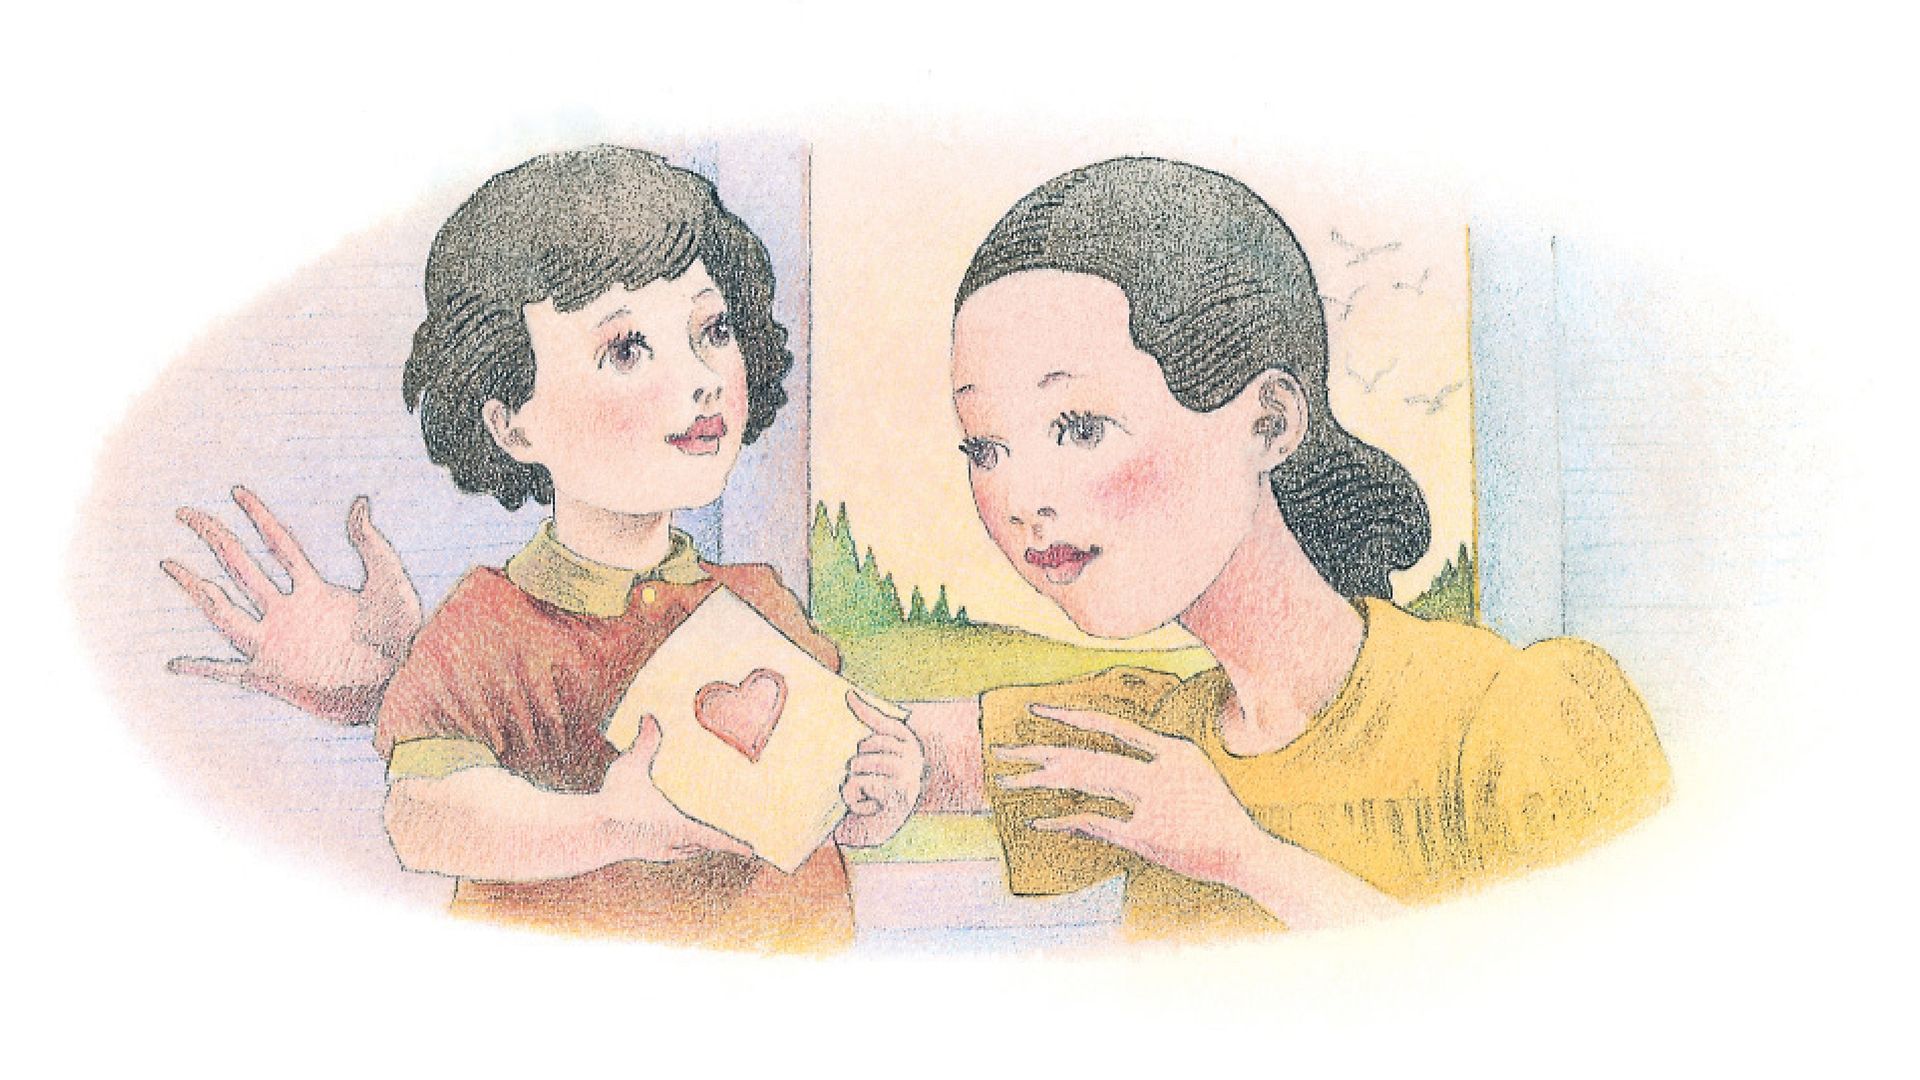 A small girl gives a Mother’s Day card to her mother. From the Children’s Songbook, page 208, “The Dearest Names”; watercolor illustration by Richard Hull.